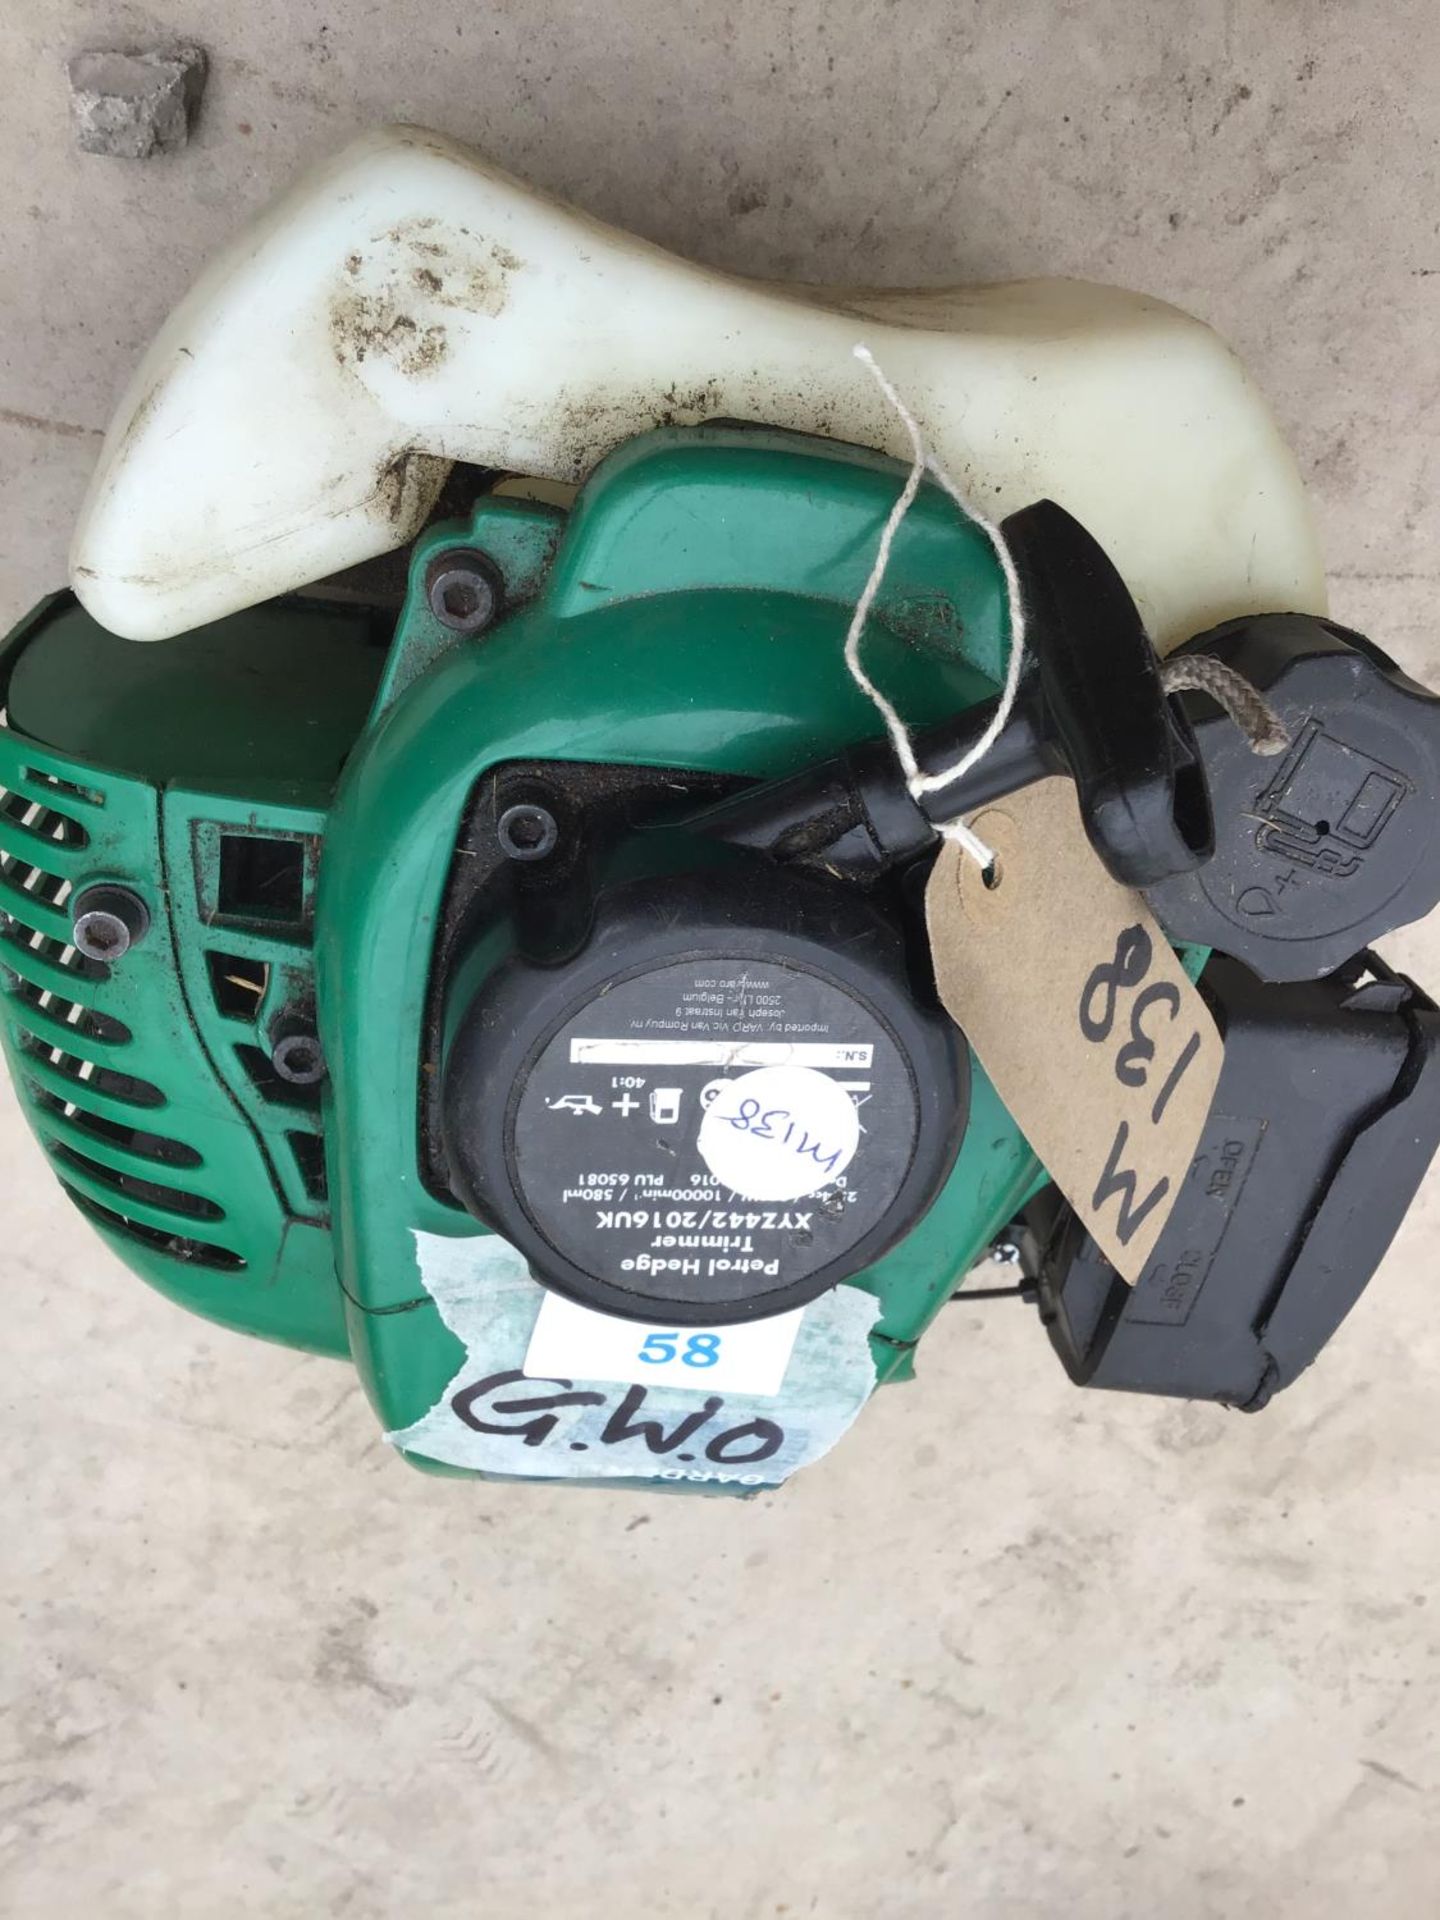 A PETROL HEDGE TRIMMER ENGINE (NO BLADE) IN WORKING ORDER